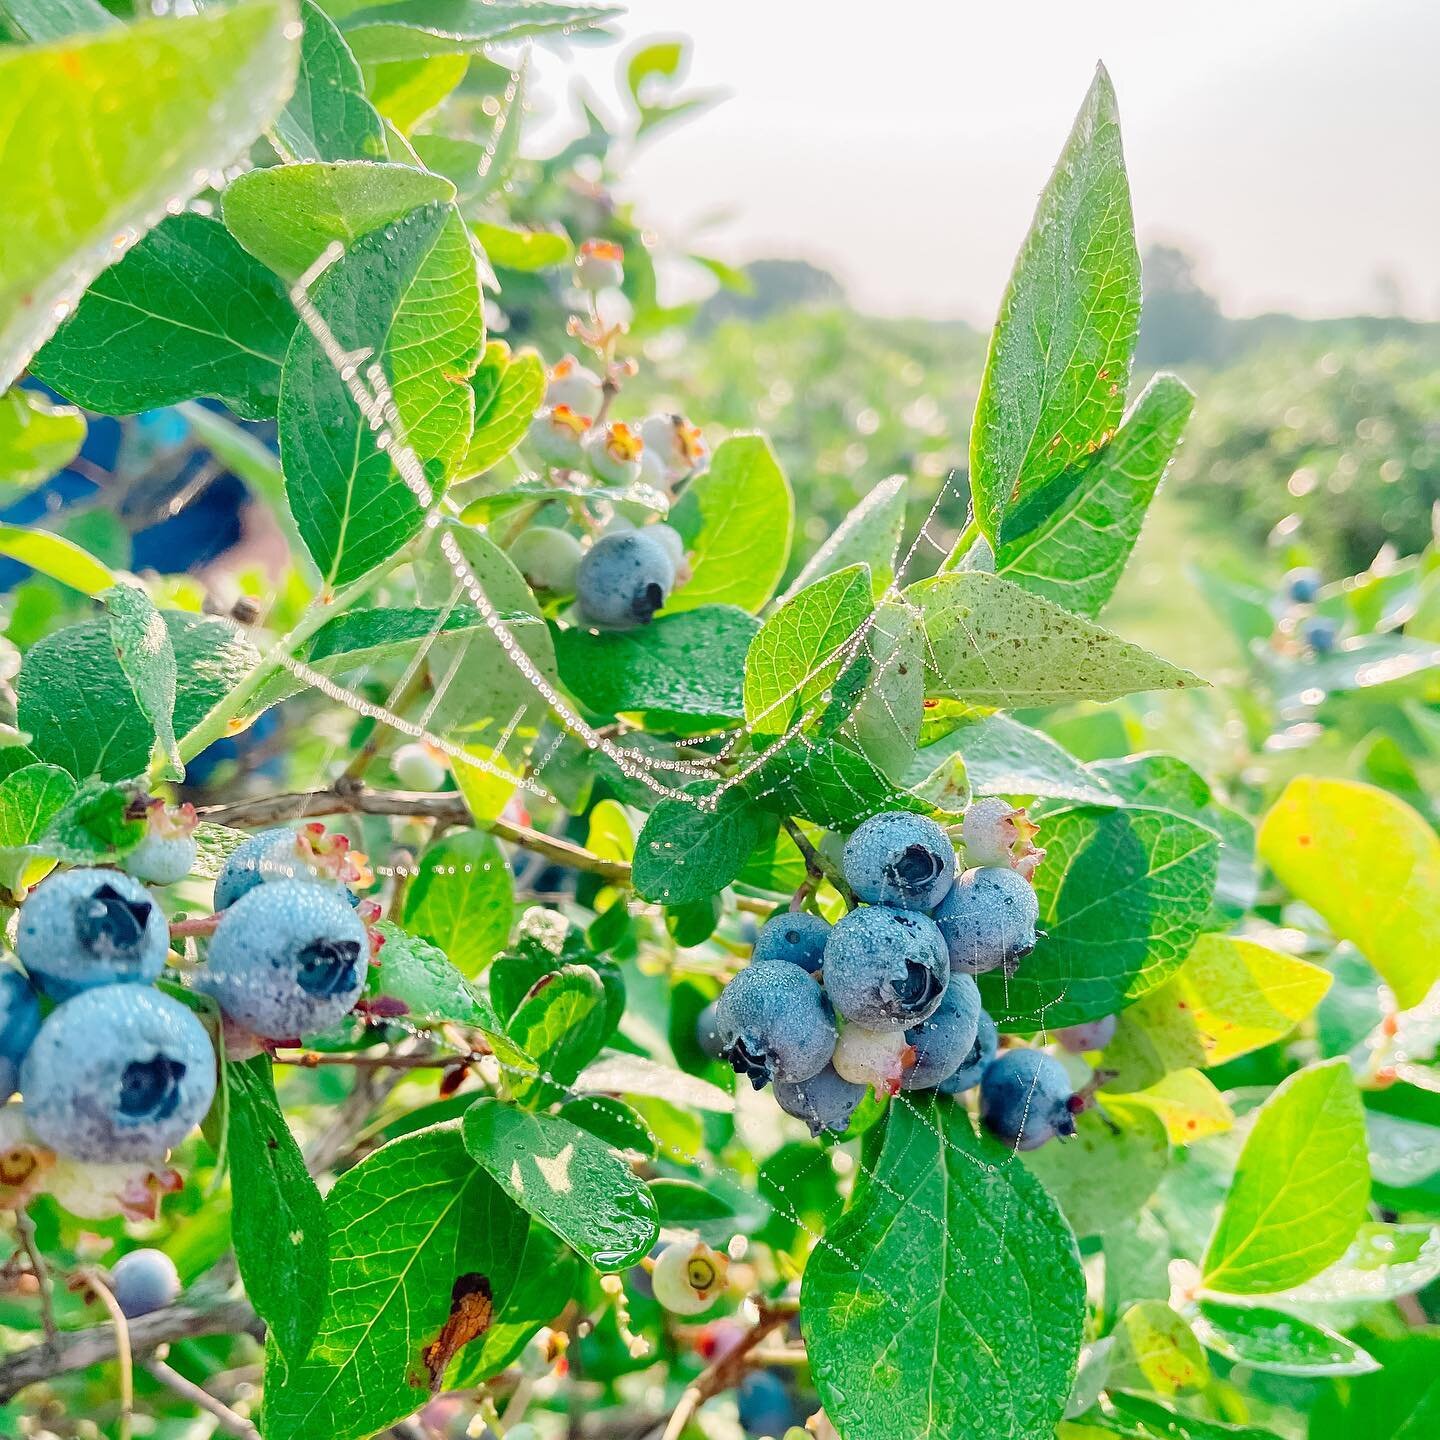 We woke up early to conquer blueberry picking! The berries were gorgeous, the weather was delightful, and the company was lovely. So blessed to have an organic upick right down the road and now we're all stocked up for the coming year!